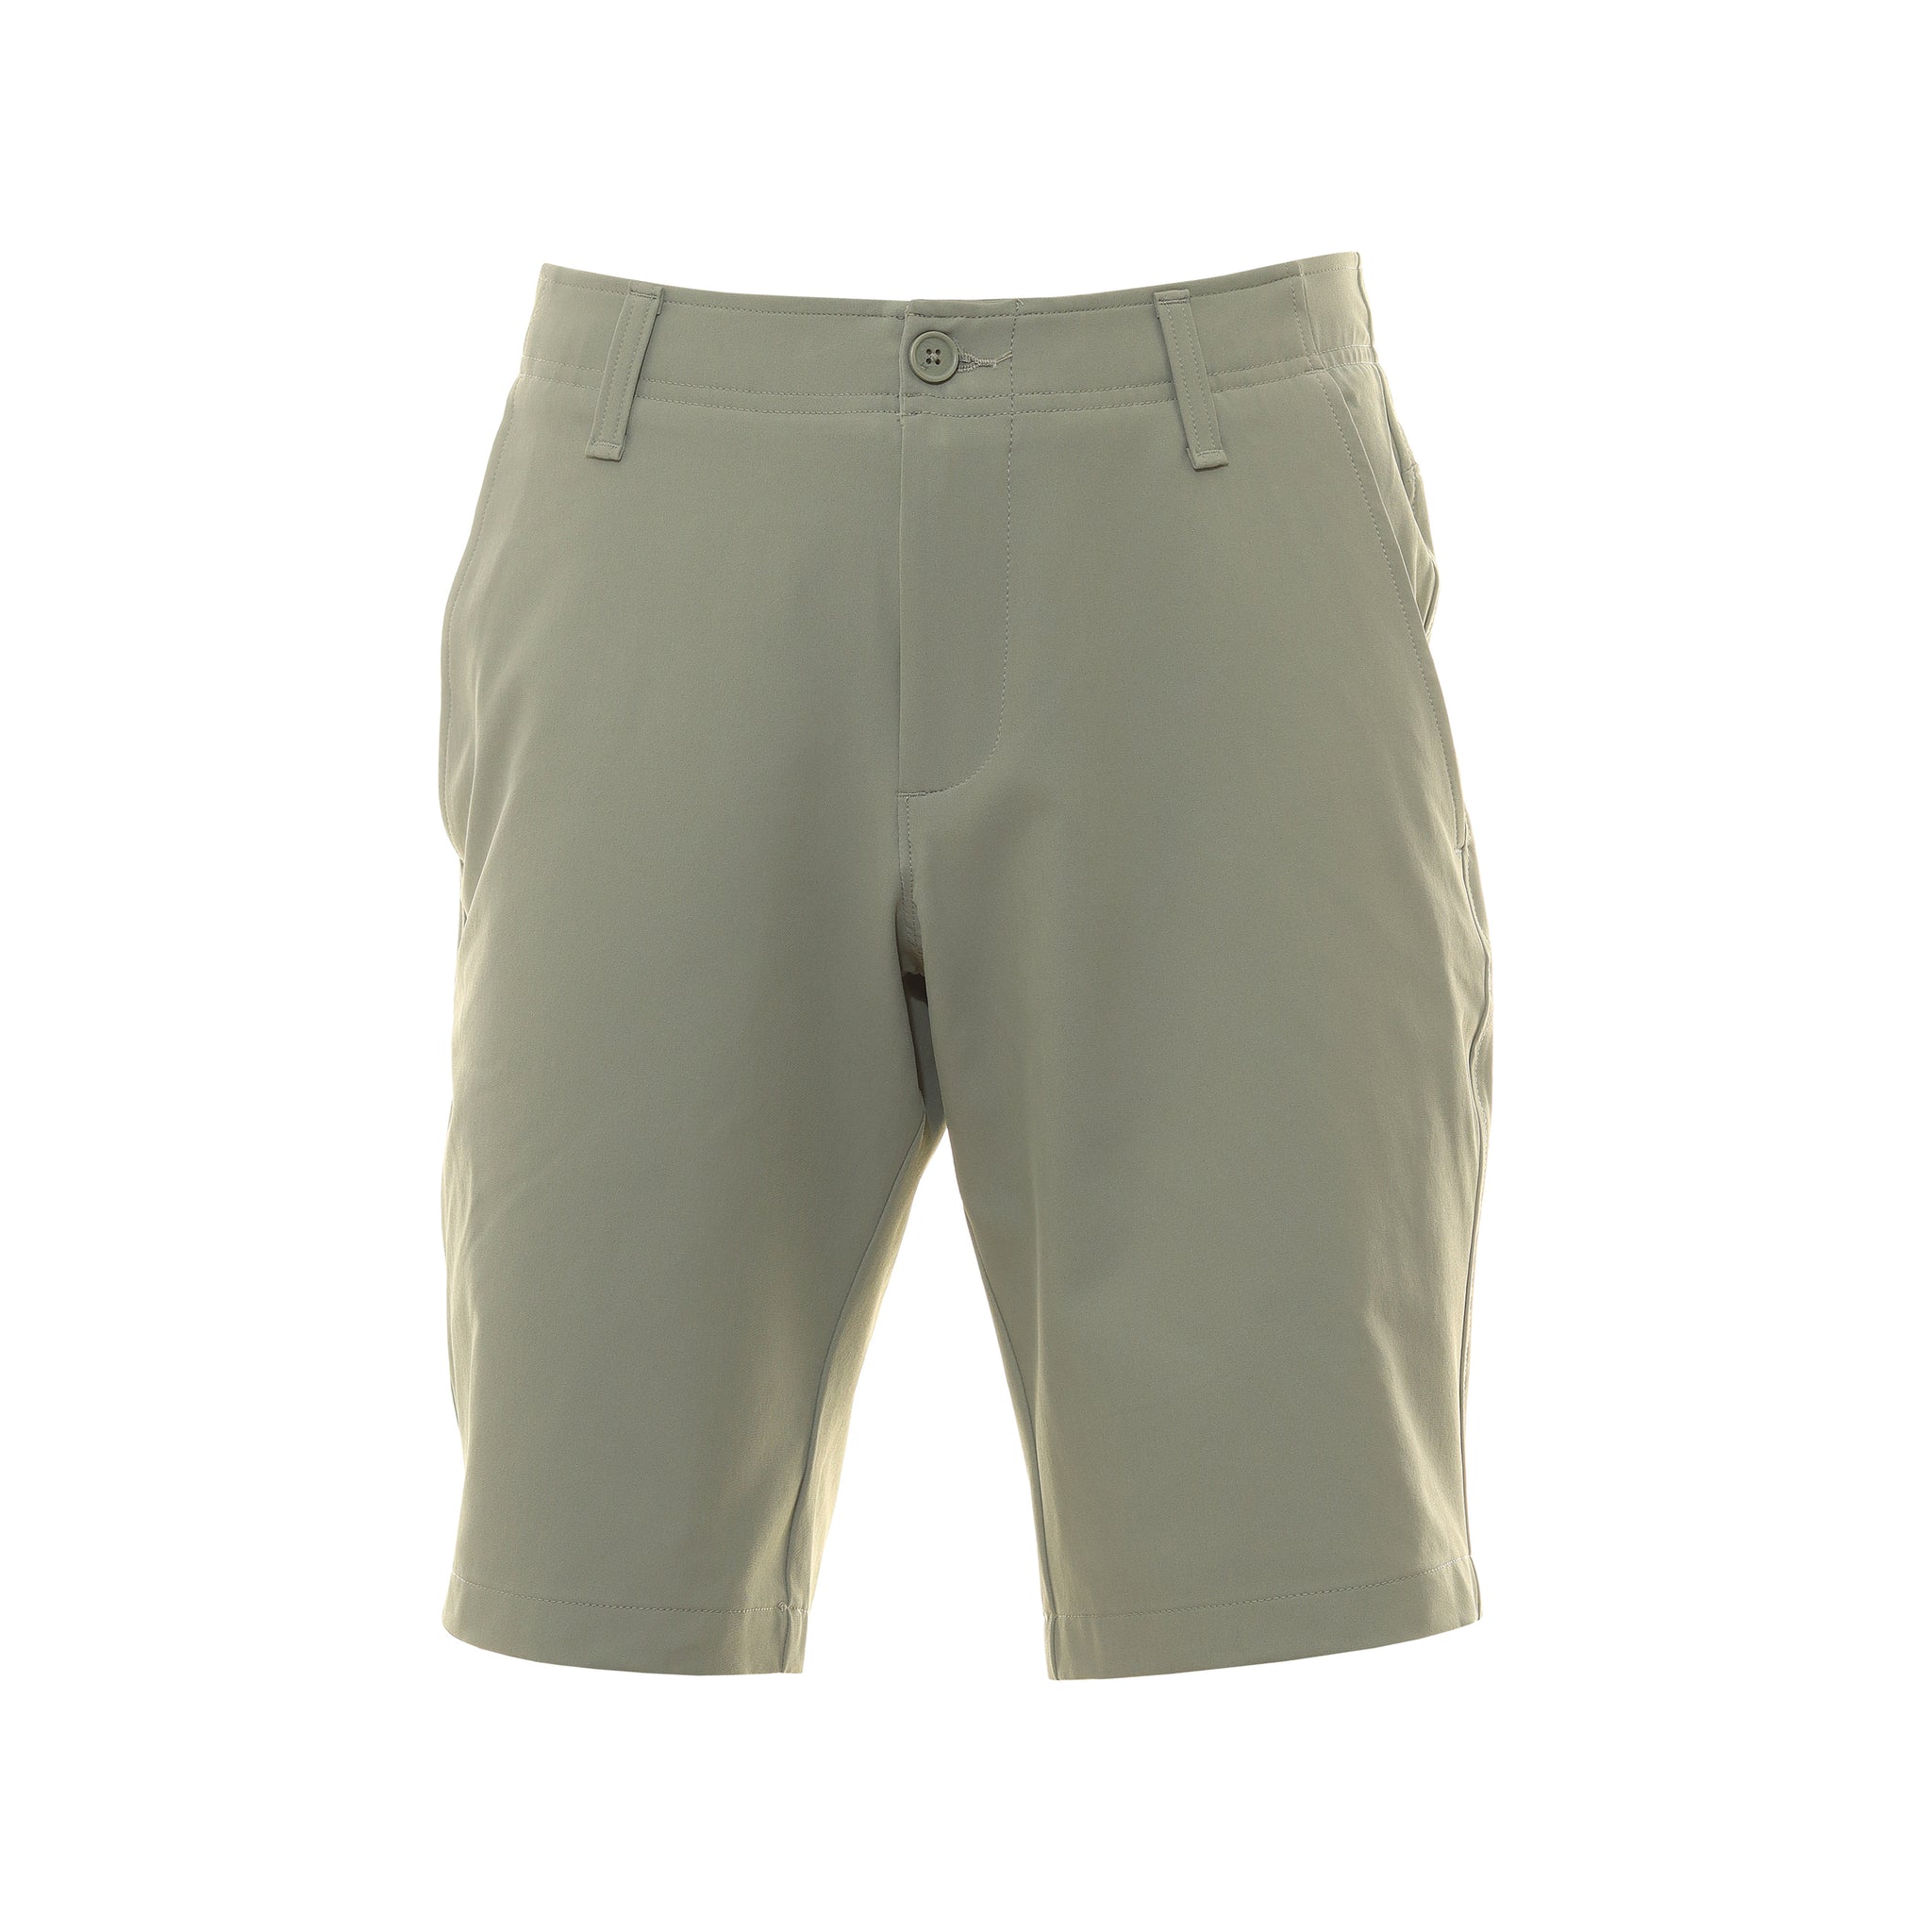 Under Armour Golf UA Drive Tapered Shorts 1370086 Grove Green 504, Function18